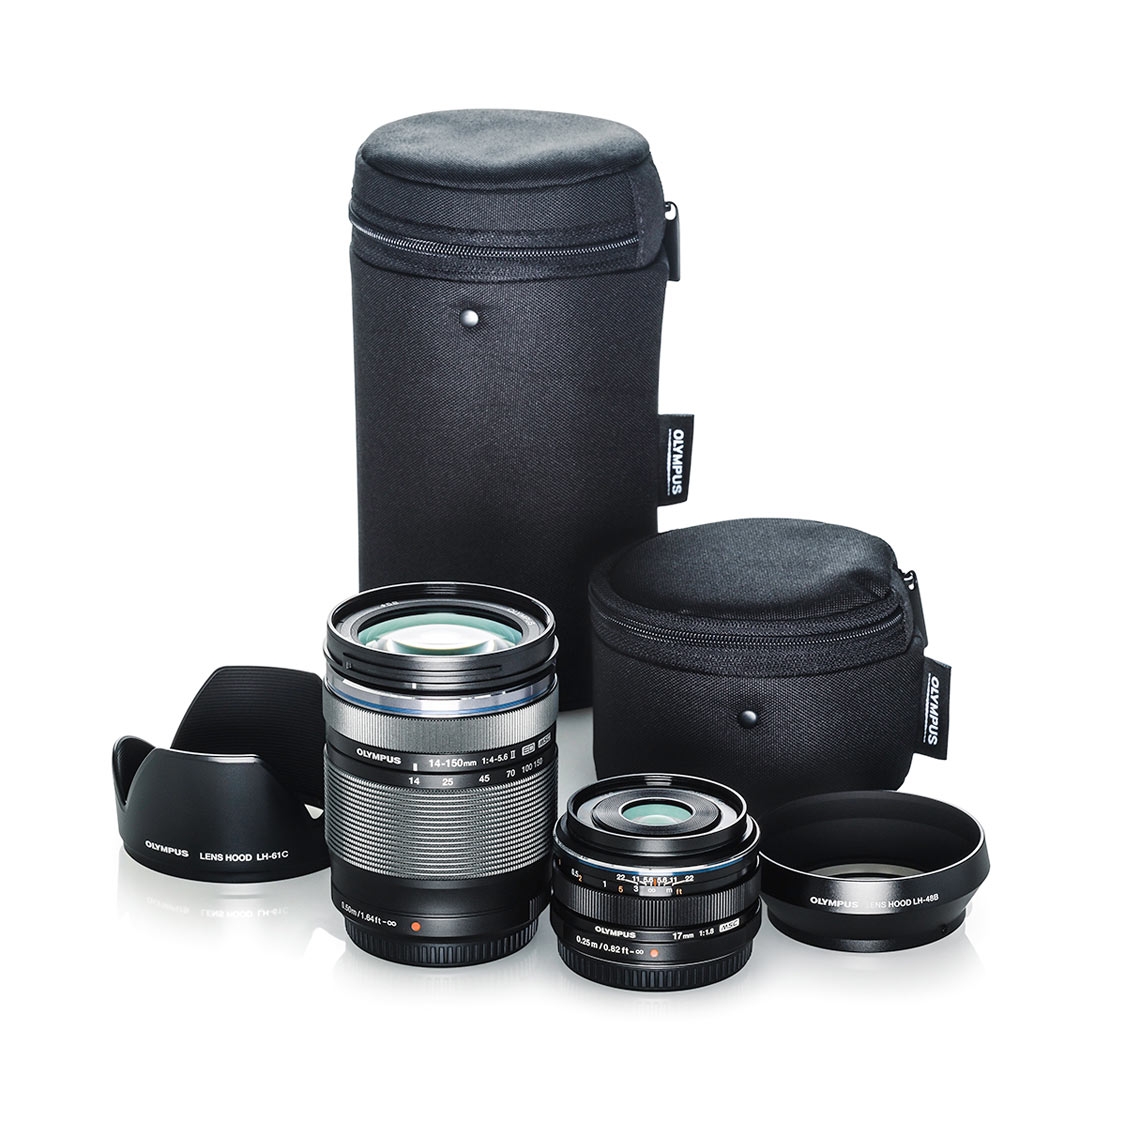 Olympus Travel Kit with 17mm F1.8, 14-150mm II, 2 Hoods and 2 Lens Cases